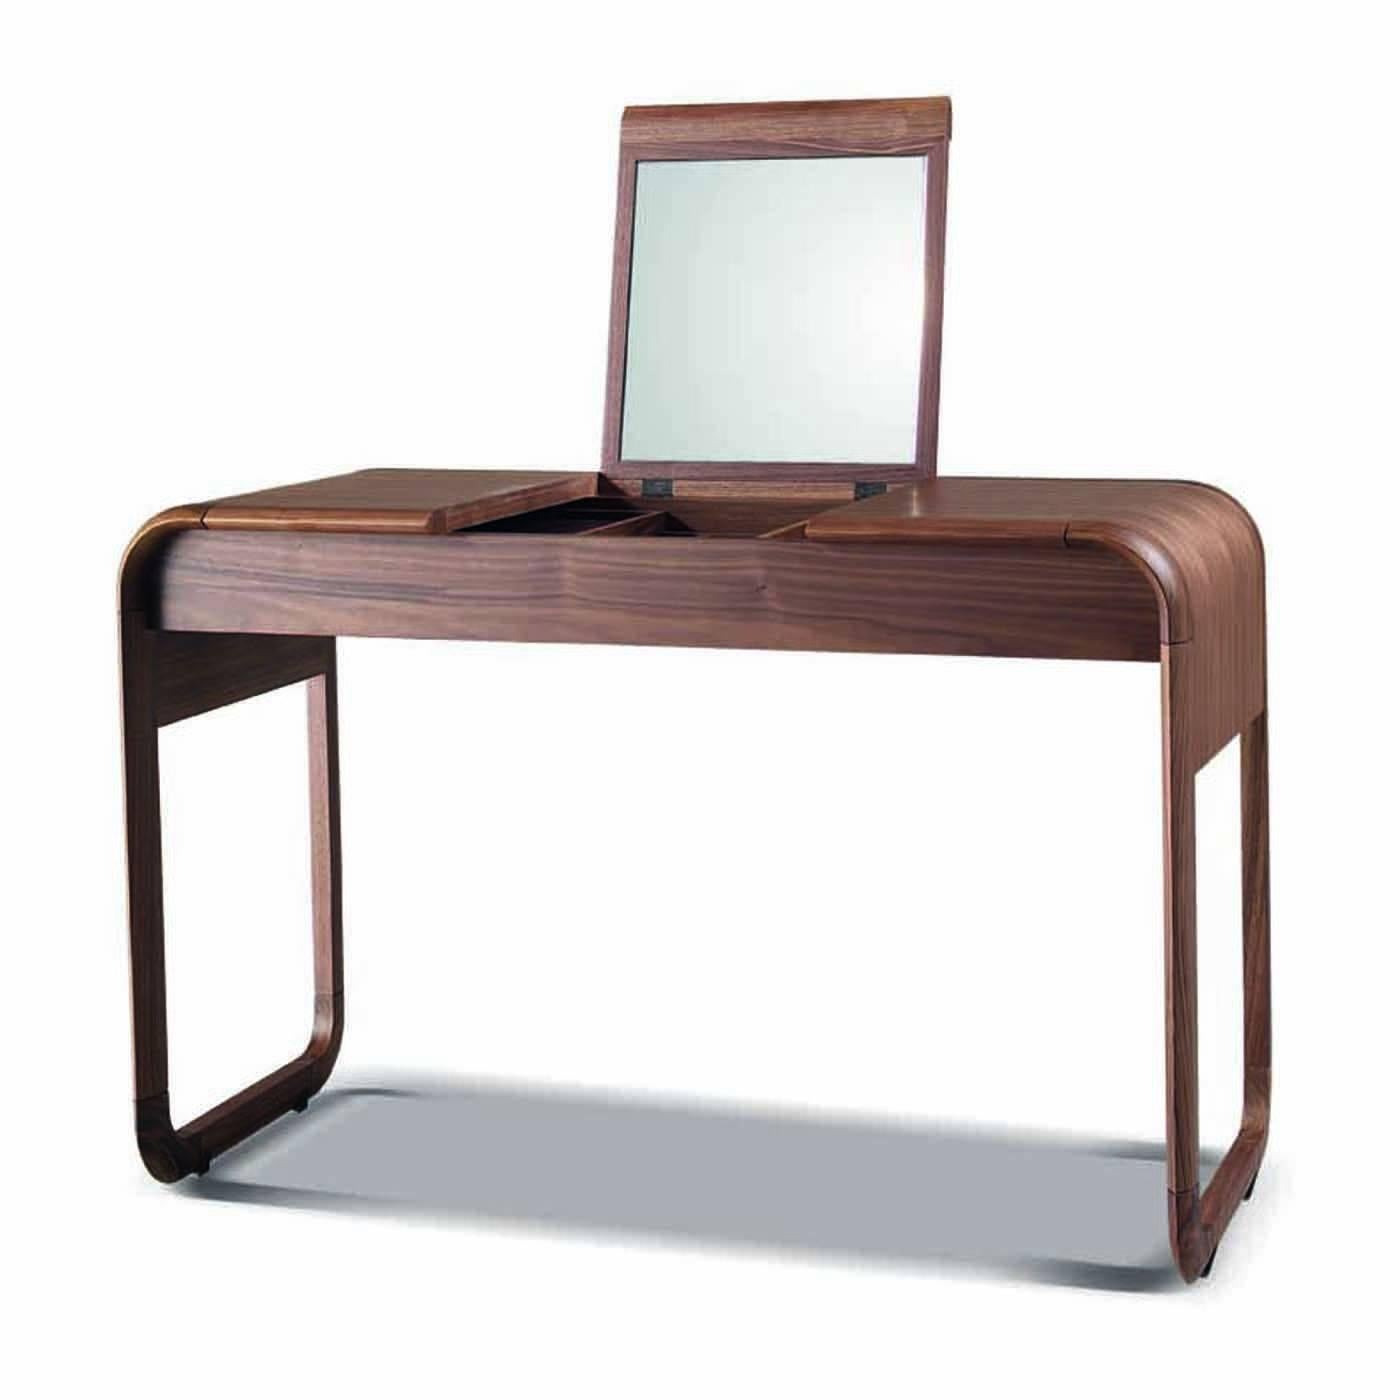 This exquisite vanity table is part of the Infinity series and is made entirely in walnut wood. The top curves on both sides to create the feet supporting it, adding a gentle roundness to the clean geometry of this piece that features a drop